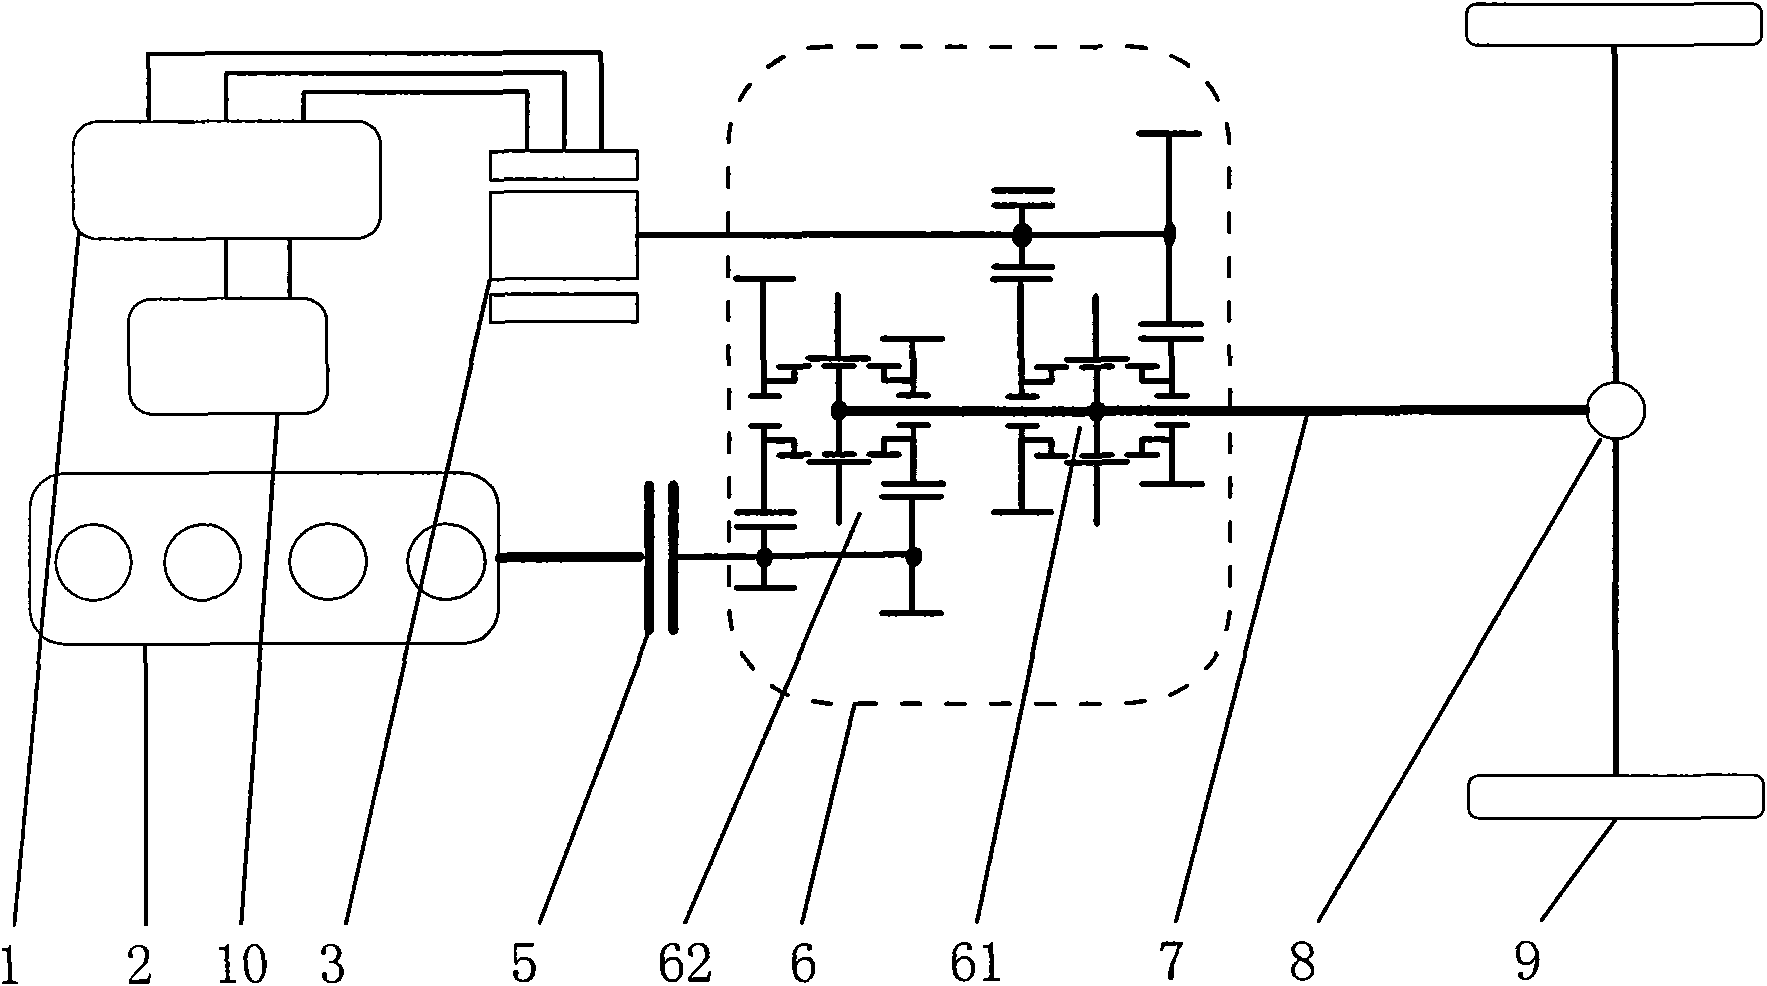 Dual-drive dual-control continuously variable transmission hybrid power system